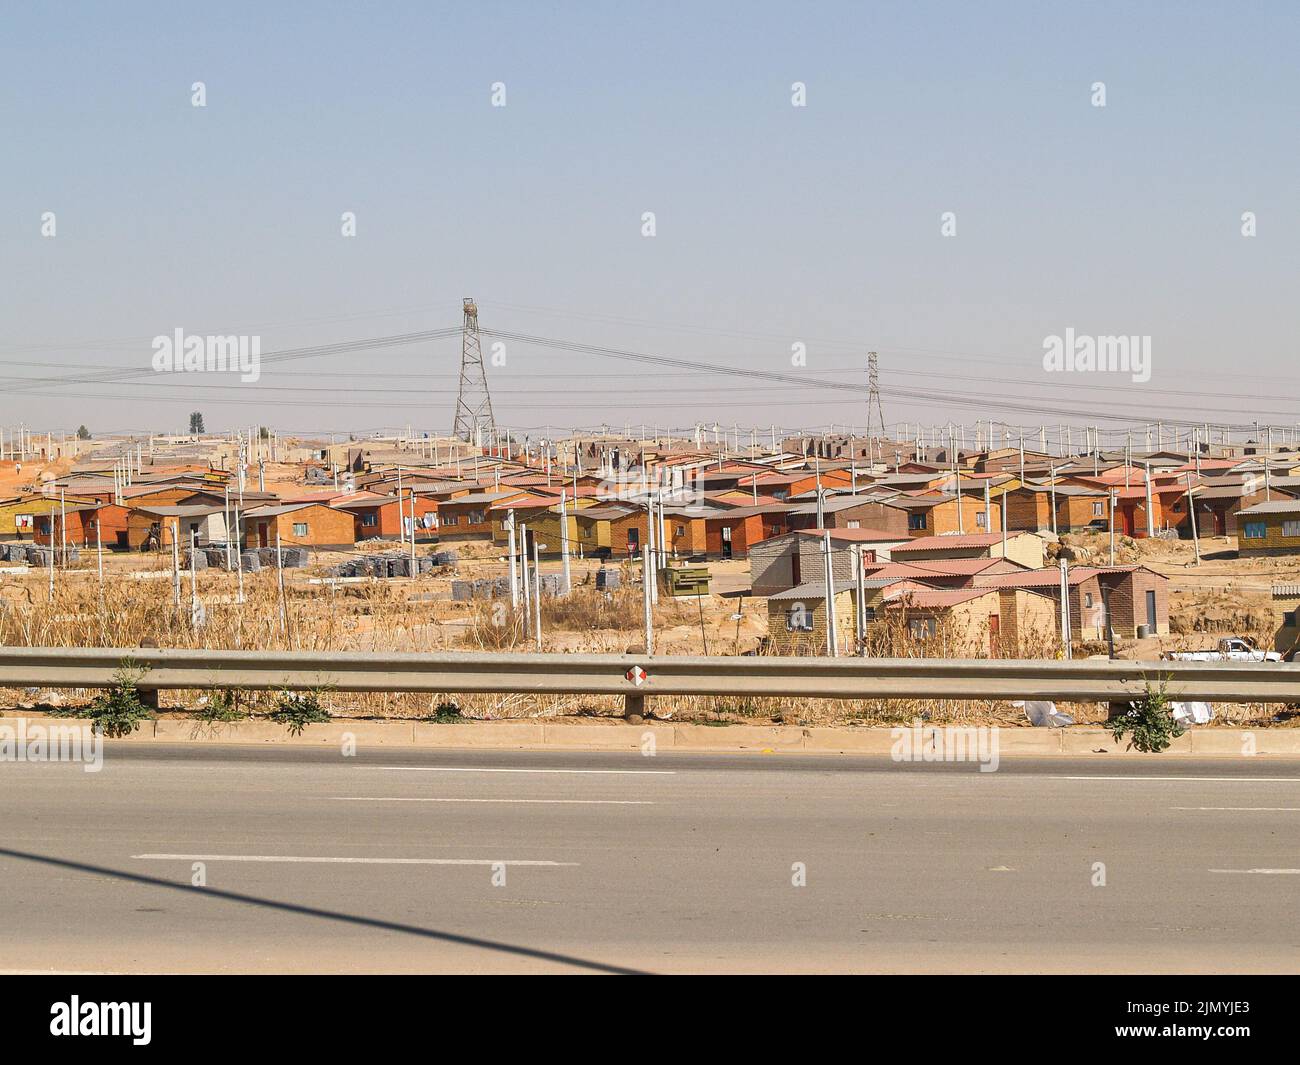 Area of low cost housing for poor along highway in South Africa.near Capetown. Stock Photo